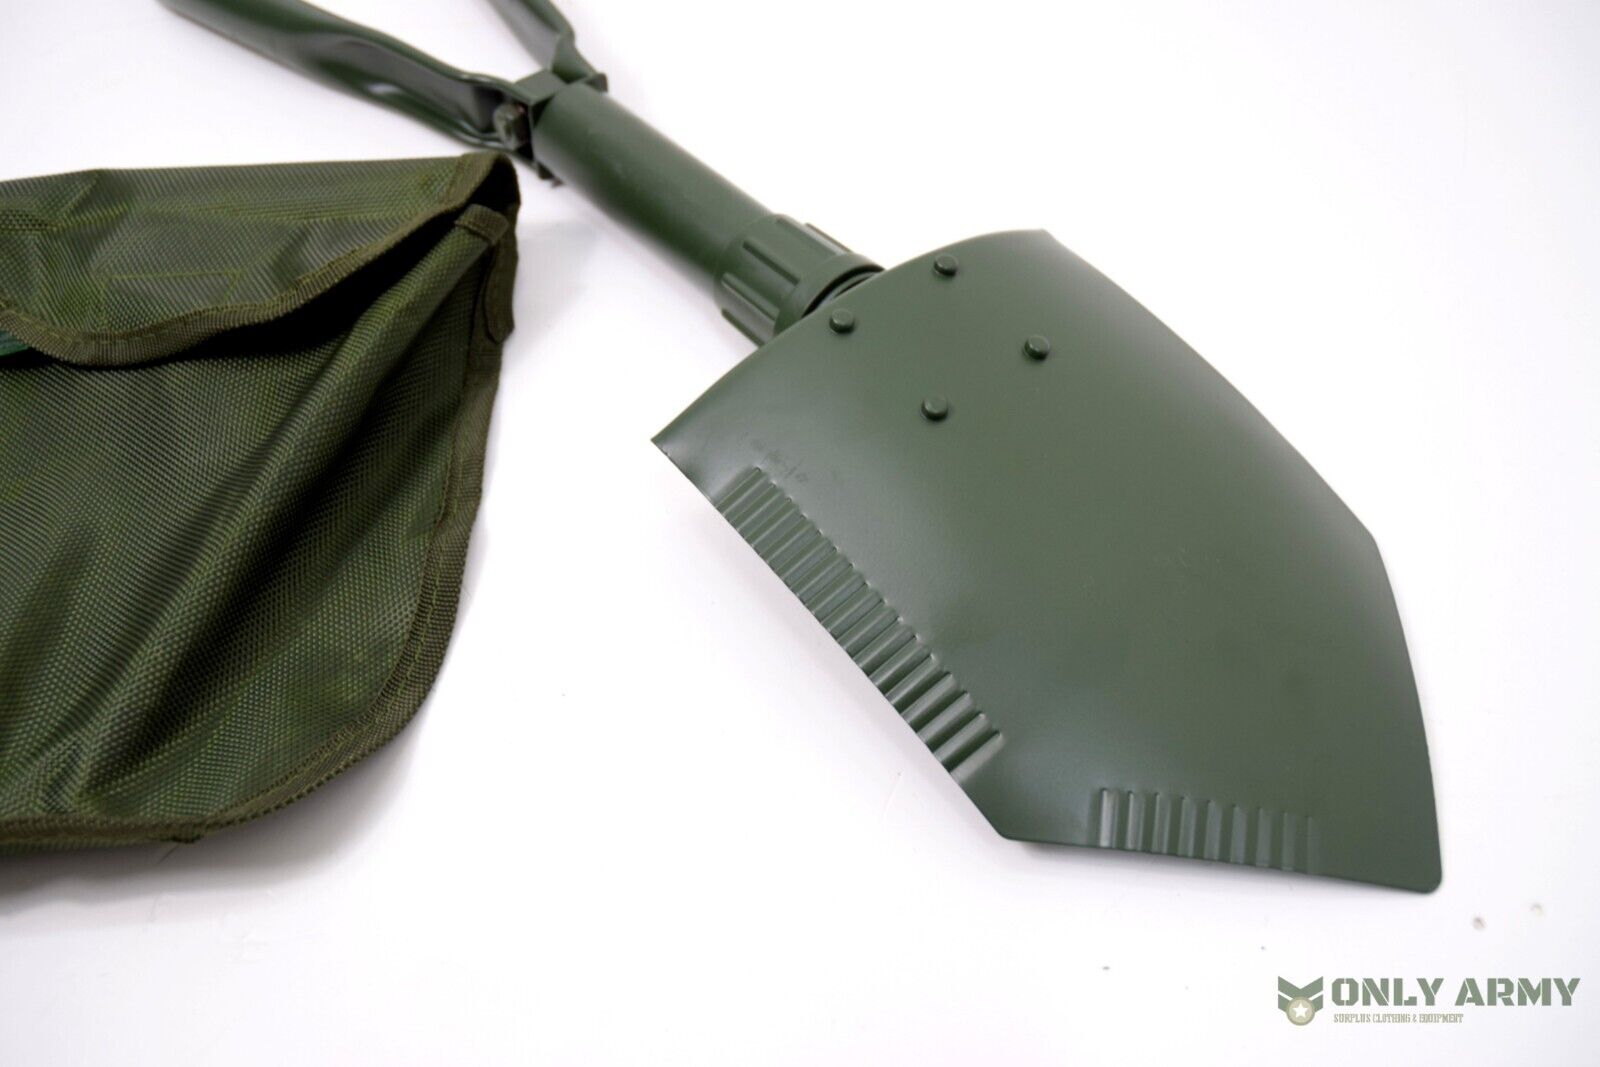 British Army Style Entrenching Tool Shovel Tri Fold Folding Shovel With Pouch